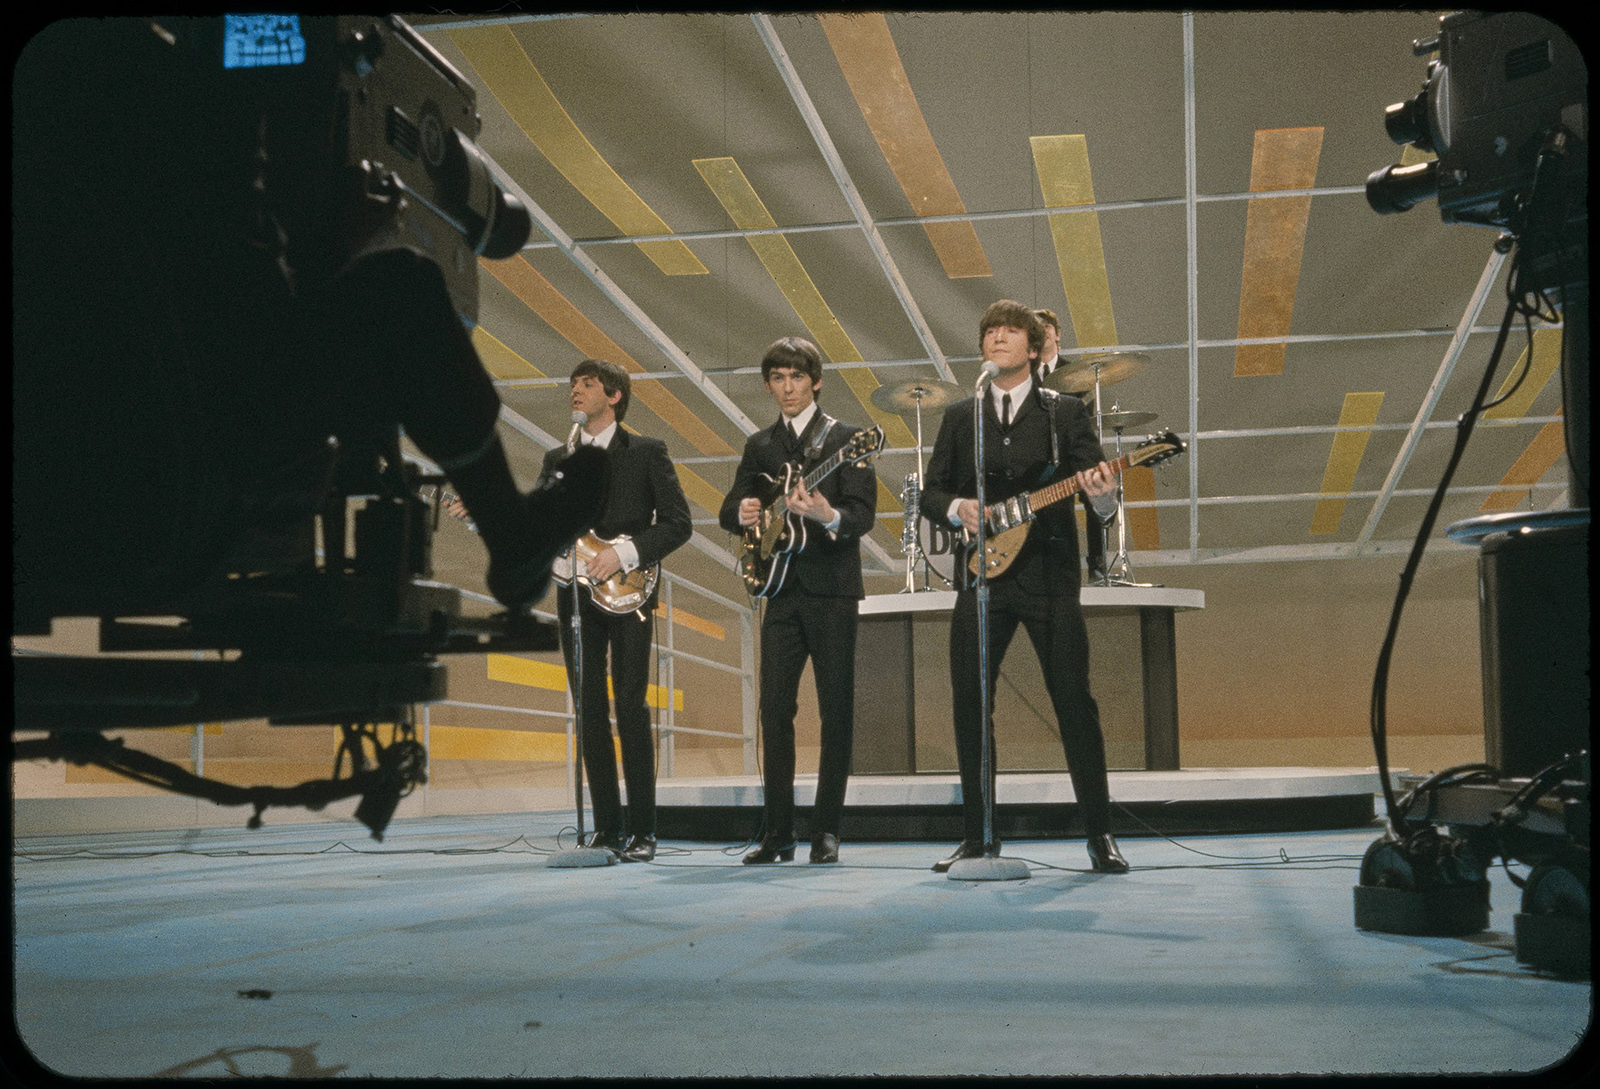 The Beatles performing at The Ed Sullivan Show on Feb. 9, 1964, in New York. (Photo by Bernard Gotfryd/LOC/Creative Commons)